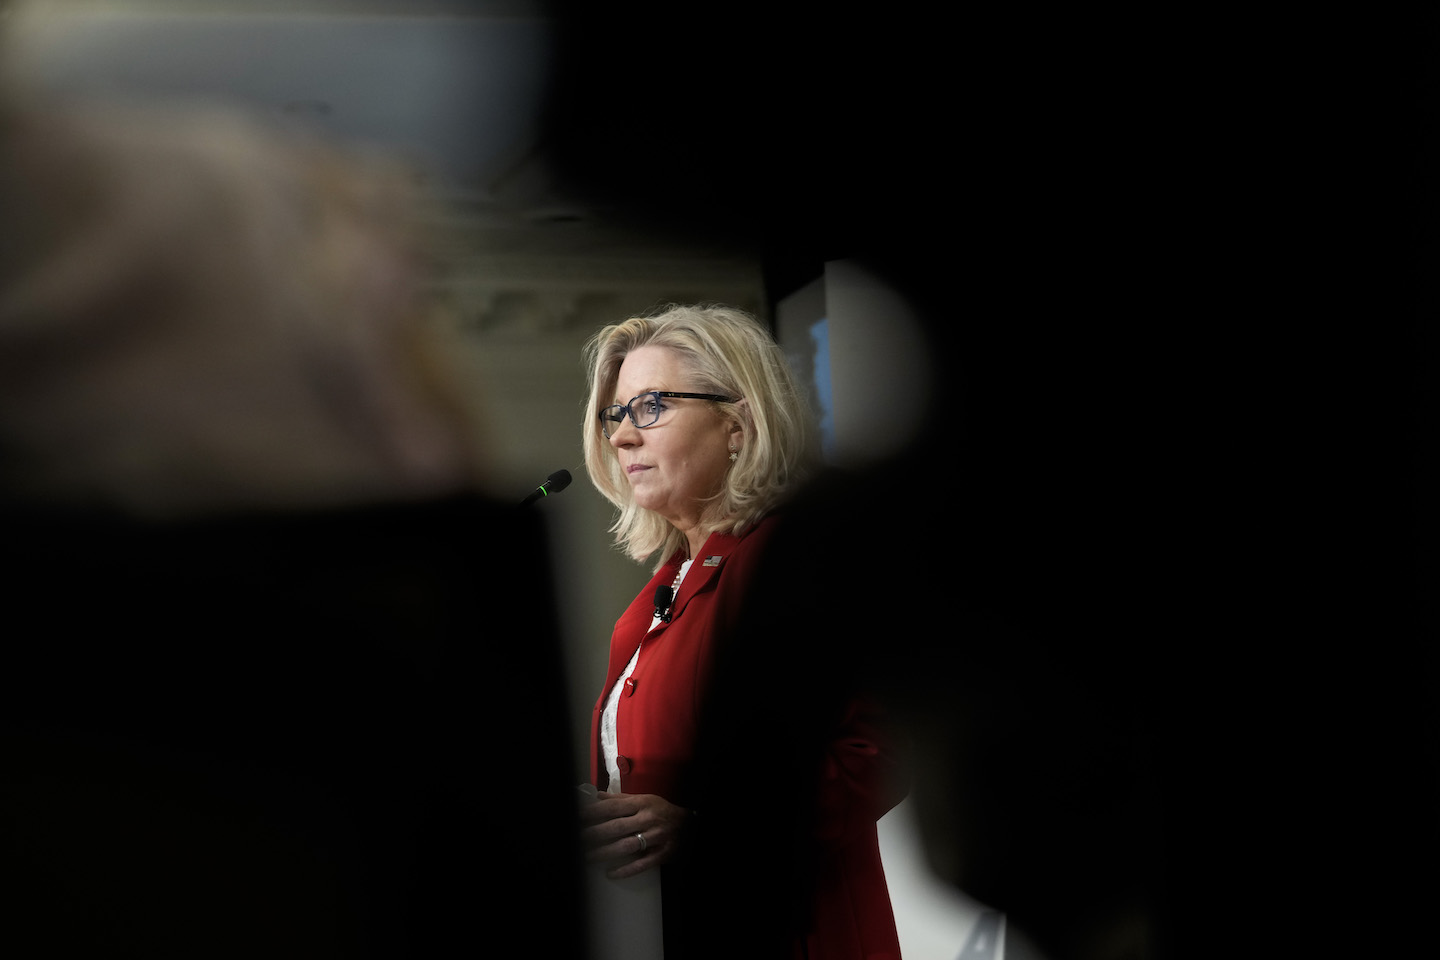 U.S. Rep. Liz Cheney (R-WY), vice chairwoman of the Select Committee to Investigate the January 6th Attack on the U.S. Capitol, speaks at American Enterprise Institute on September 19, 2022 in Washington, DC. (Drew Angerer/Getty Images)